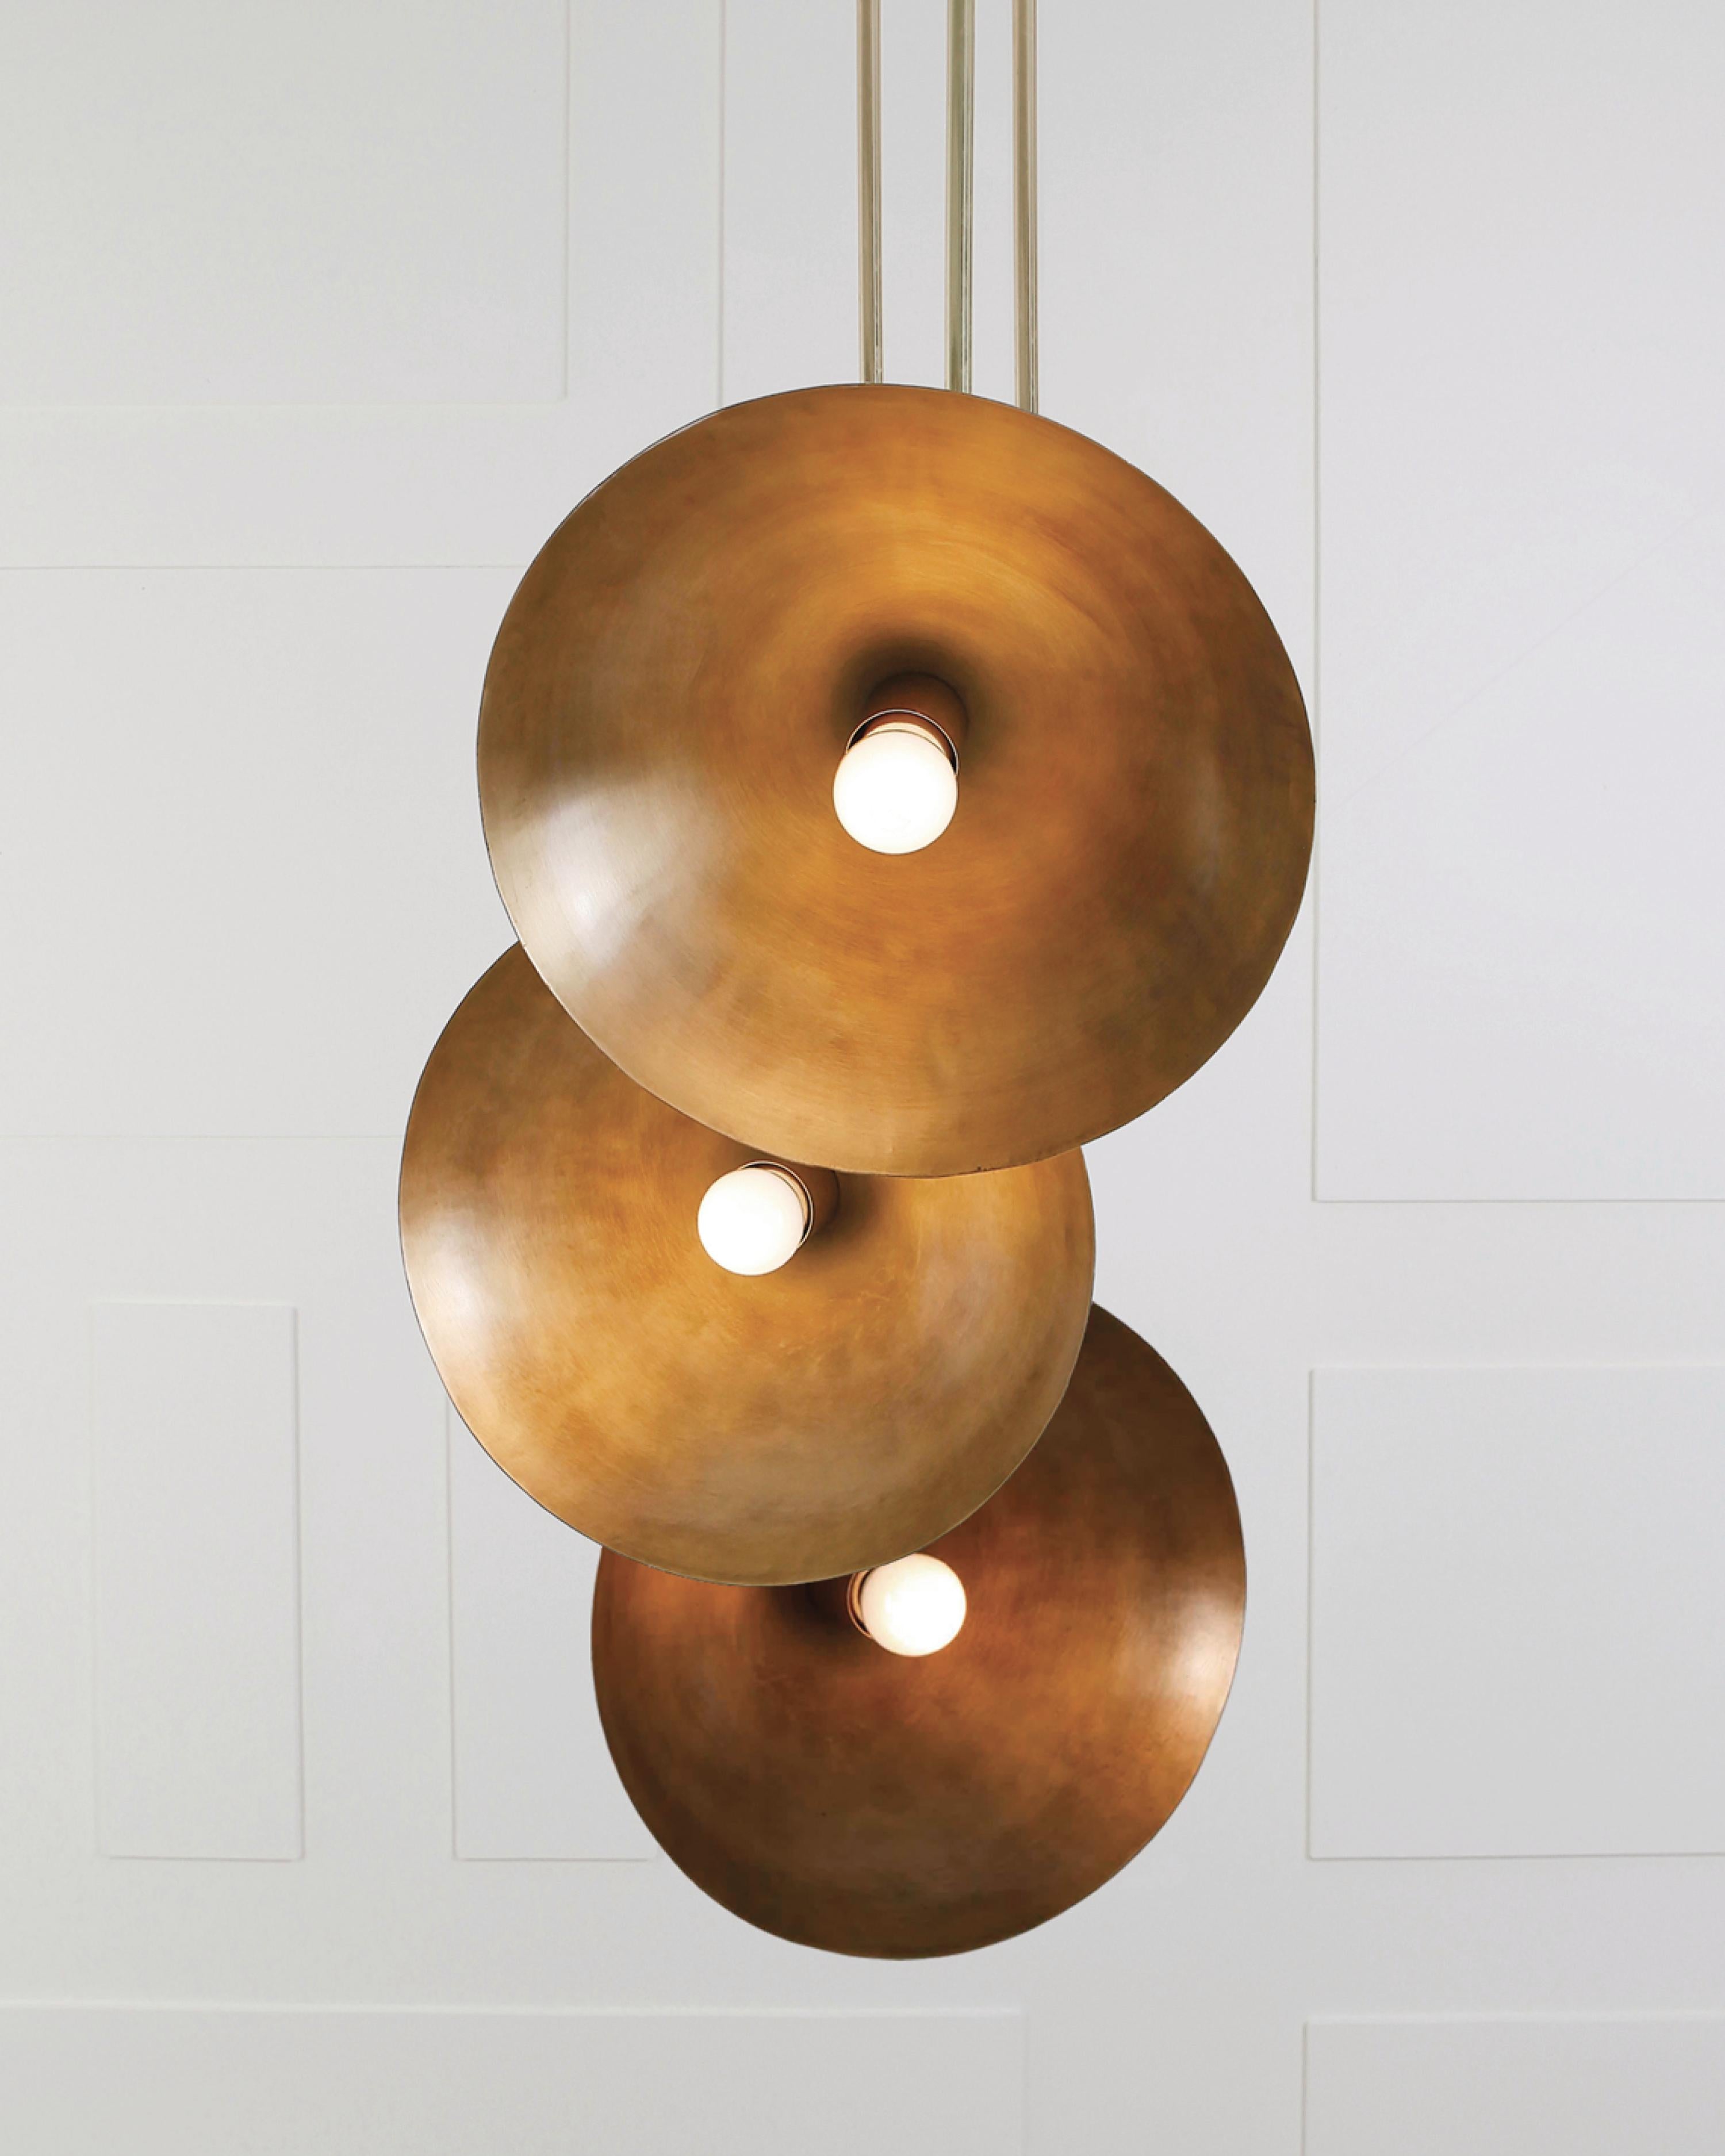 Tango III, sculpted pendant by Paul Matter
Blackened brass with aged brass details.
Shade in blackened brass (also available in aged brass)
exterior and aged interiors.
Dimensions: W 38 x D 38 x H 147 cm

Tango is born from playful